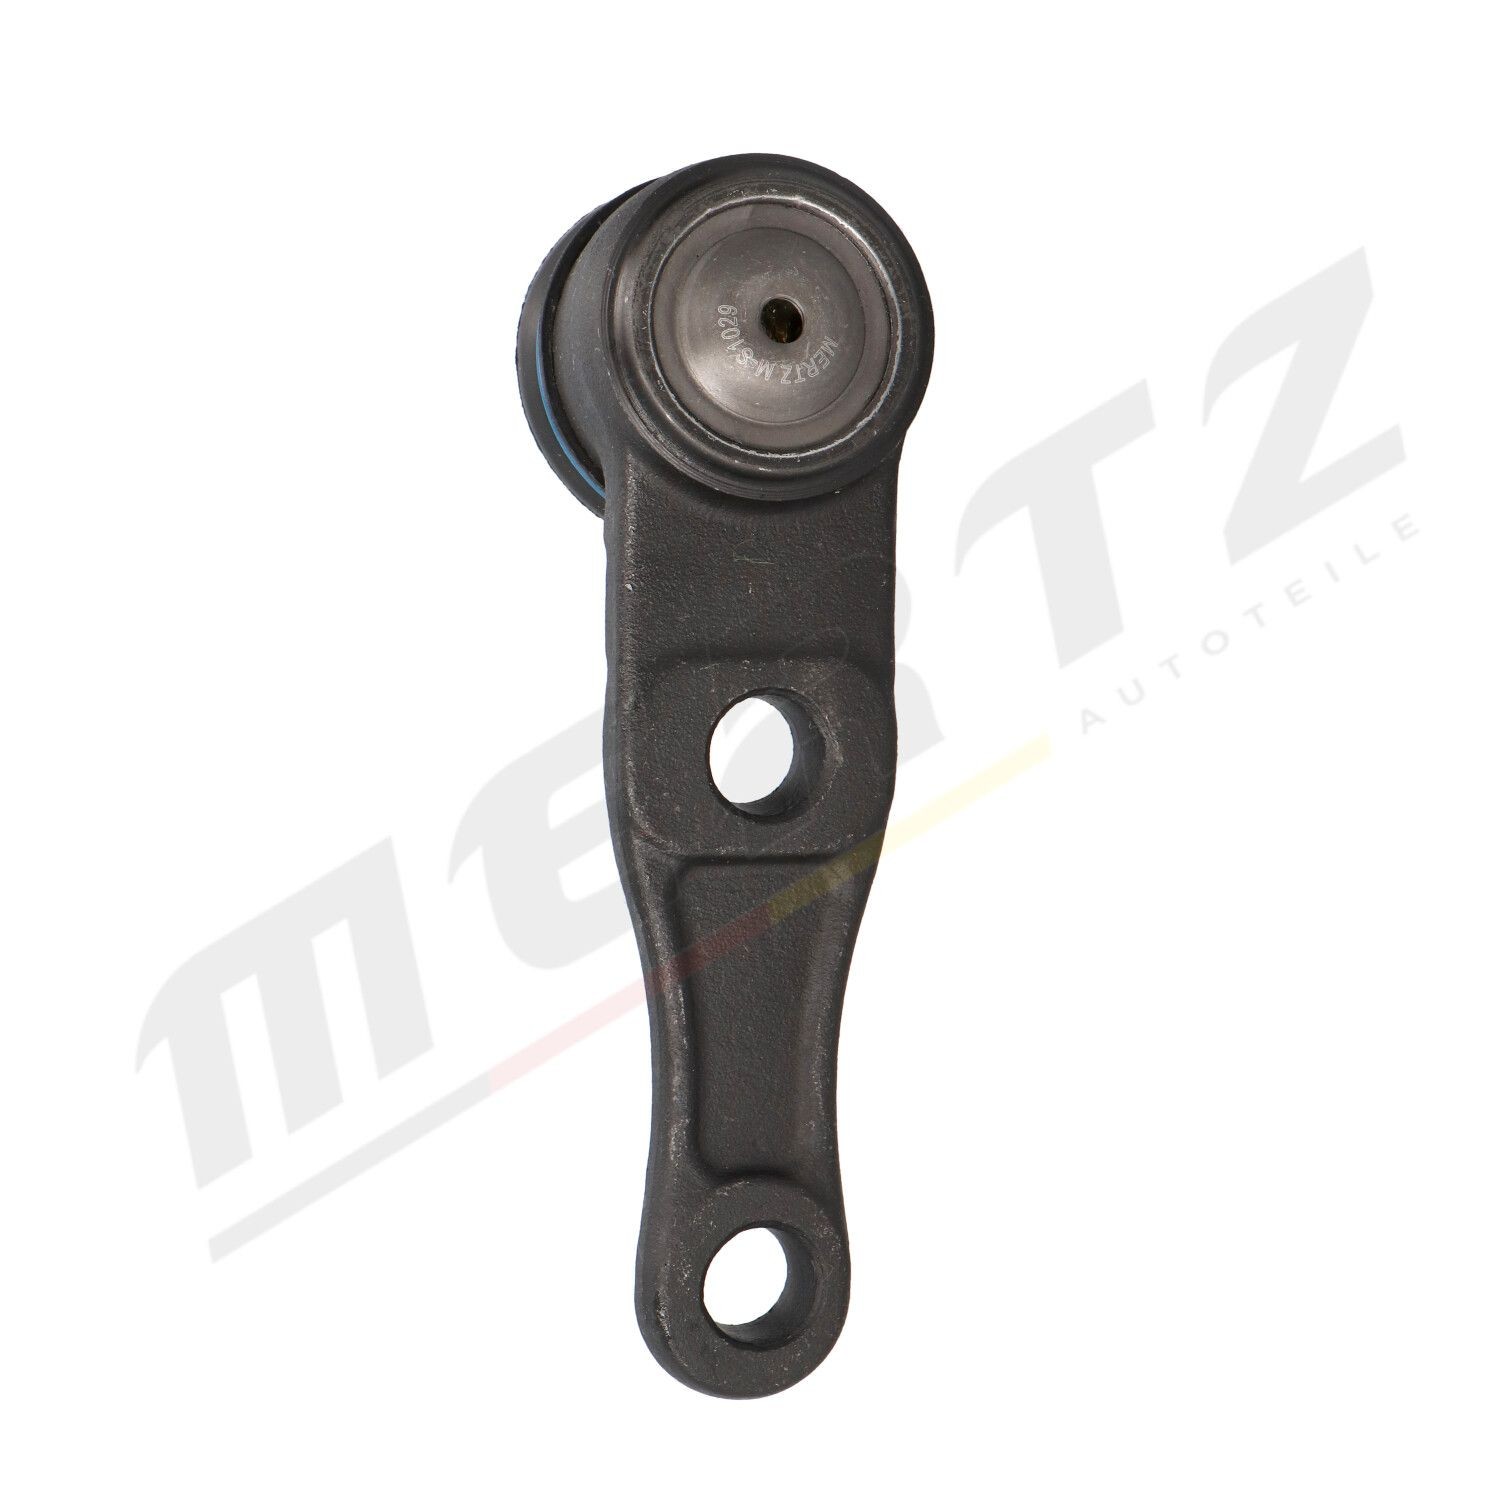 M-S1029 Suspension ball joint M-S1029 MERTZ Front Axle Left, Front Axle Right, 18mm, 150mm, 75mm, 45mm